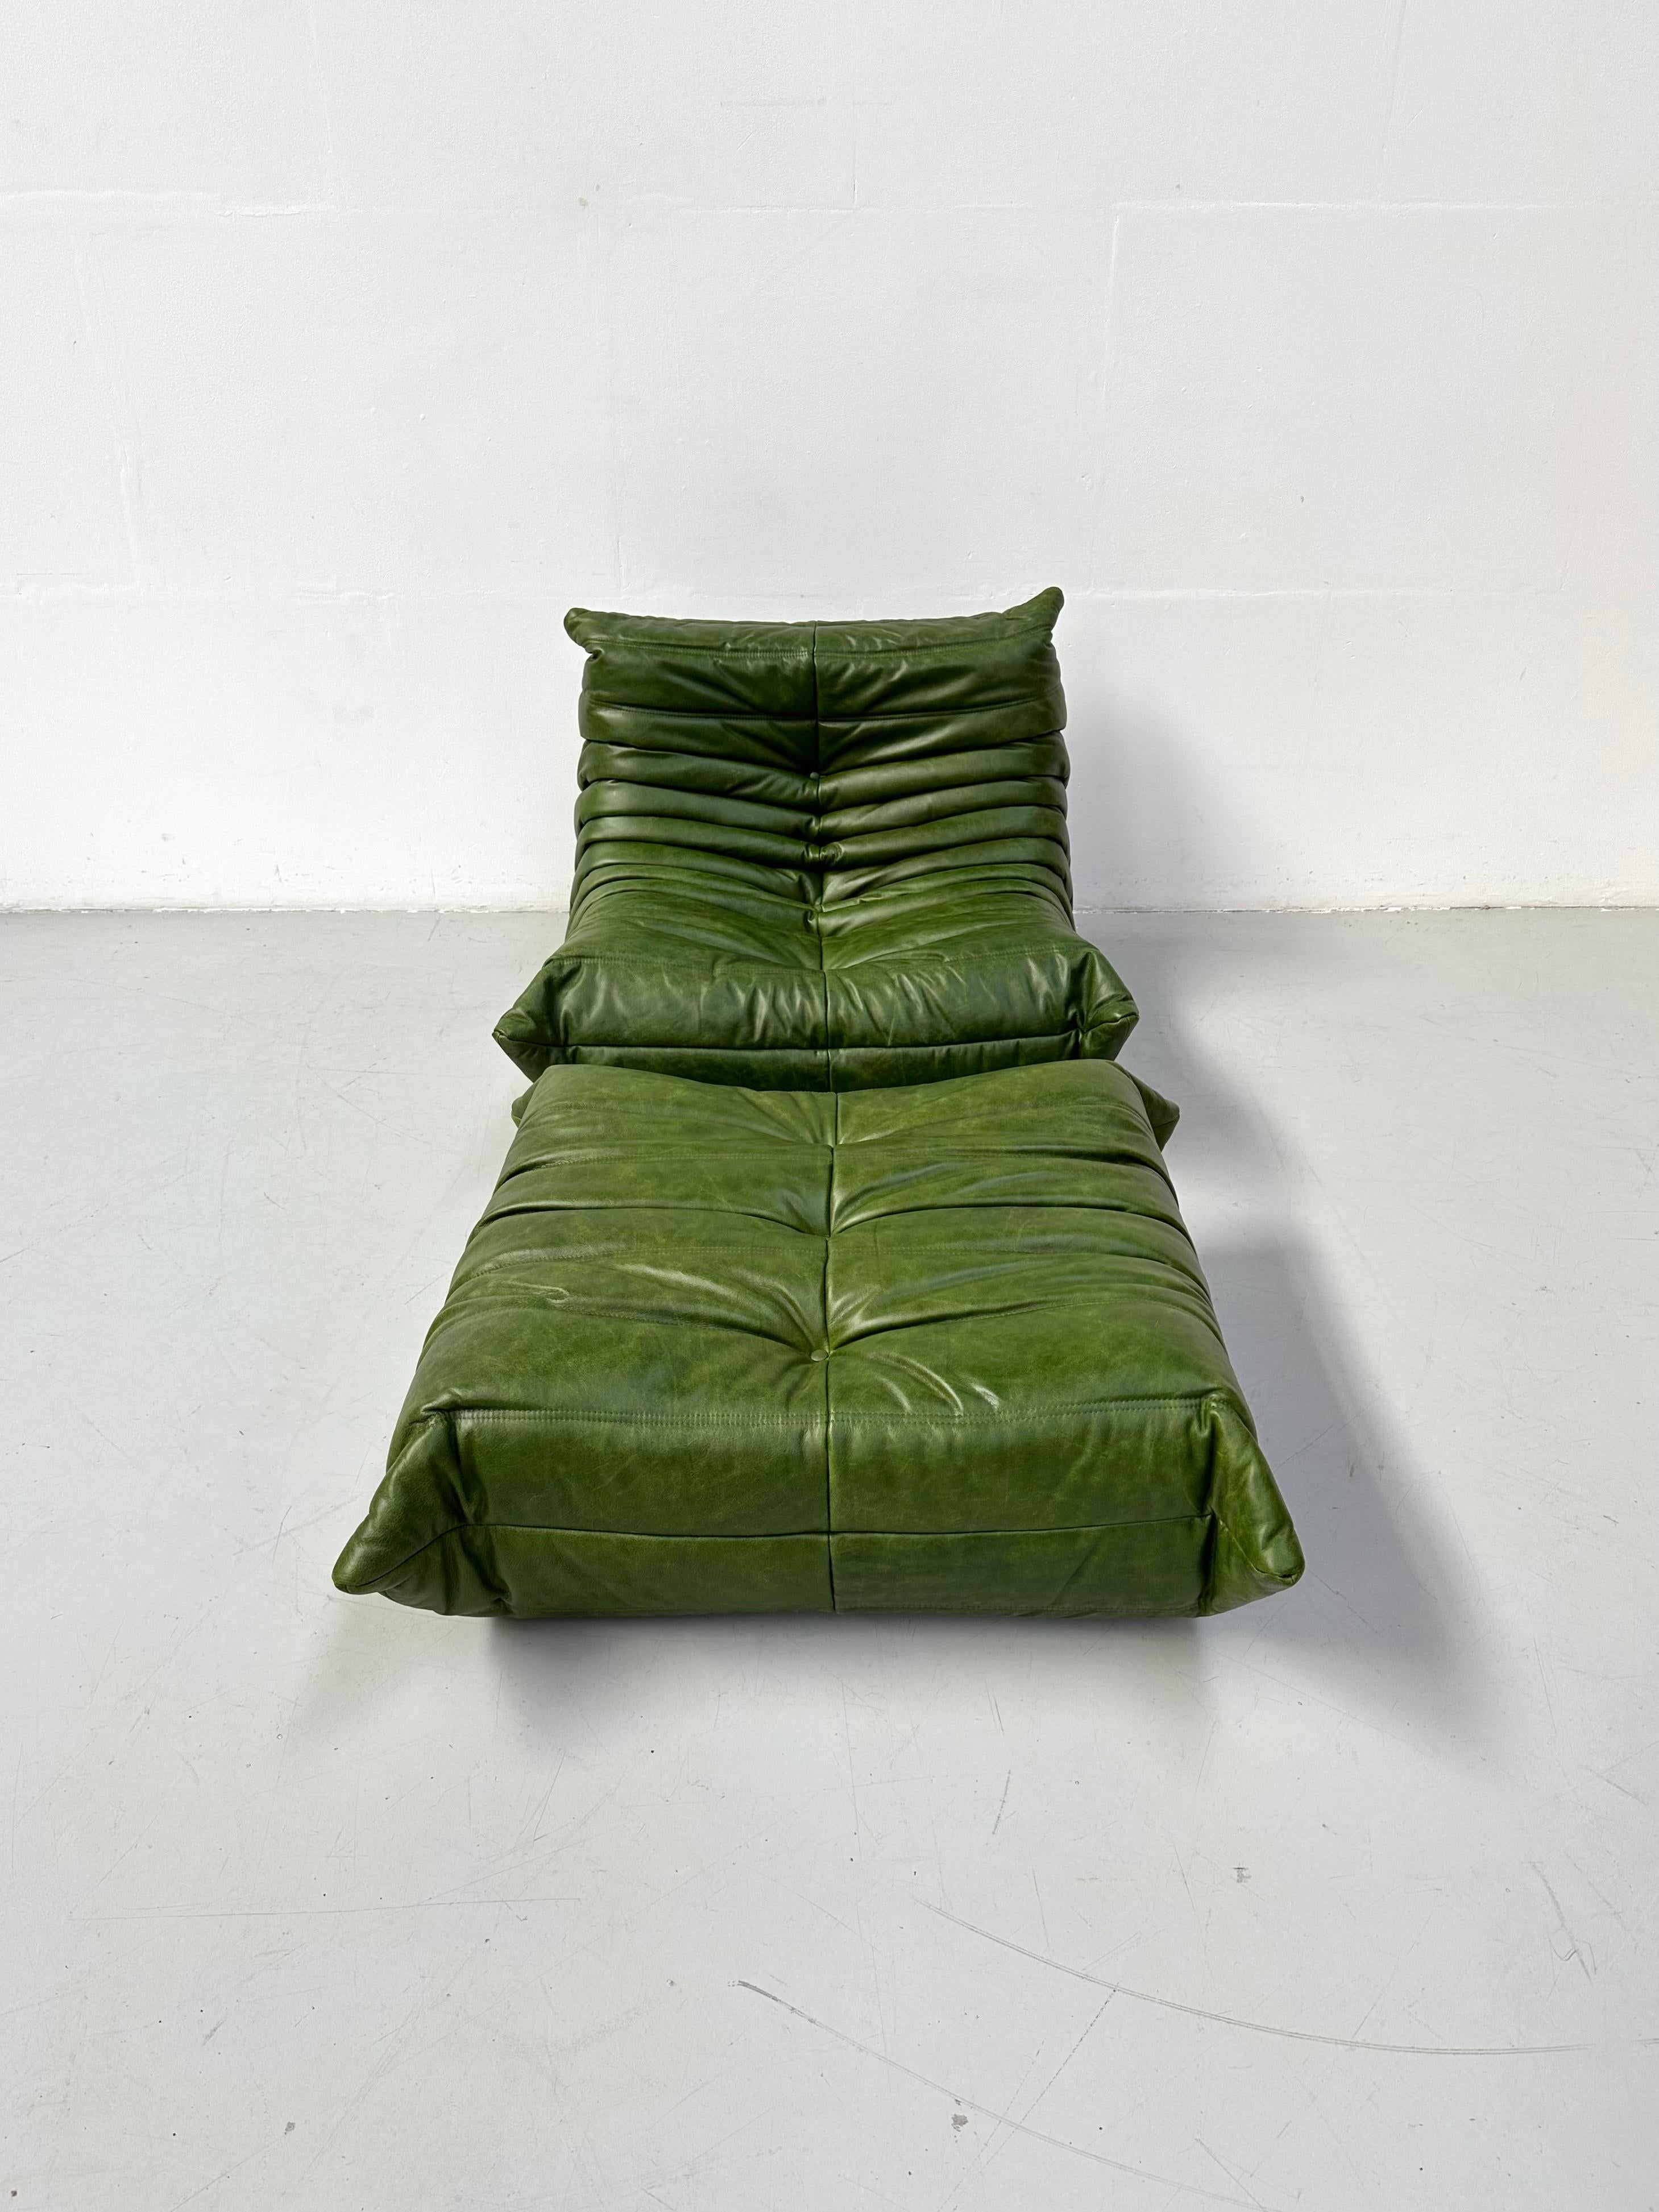 Mid-Century Modern French Togo Chair and Ottoman in Green Leather by M. Ducaroy for Ligne Roset.